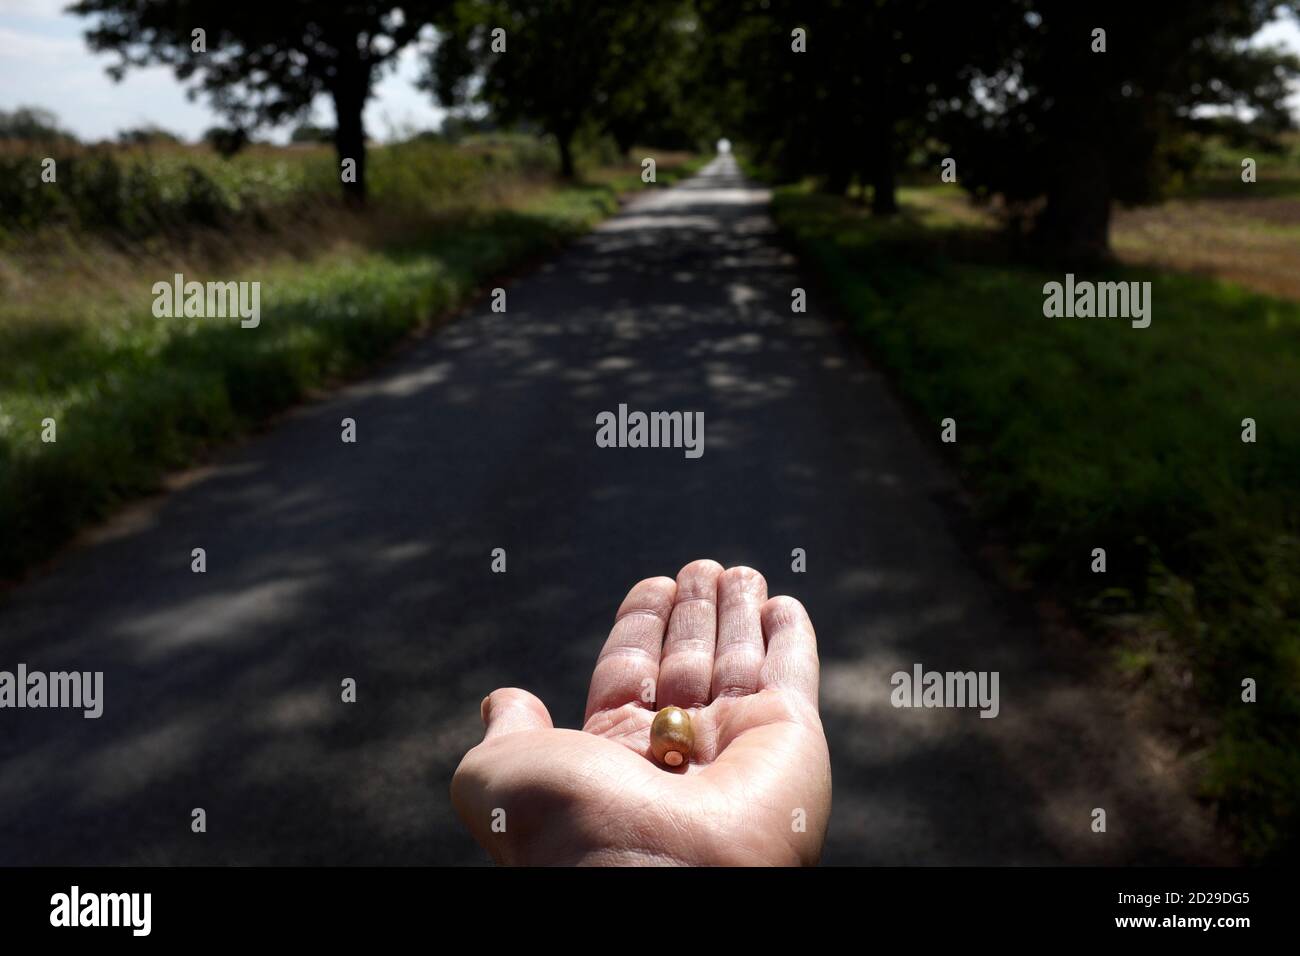 An outstretched hand holding a single acorn on a country lane Stock Photo